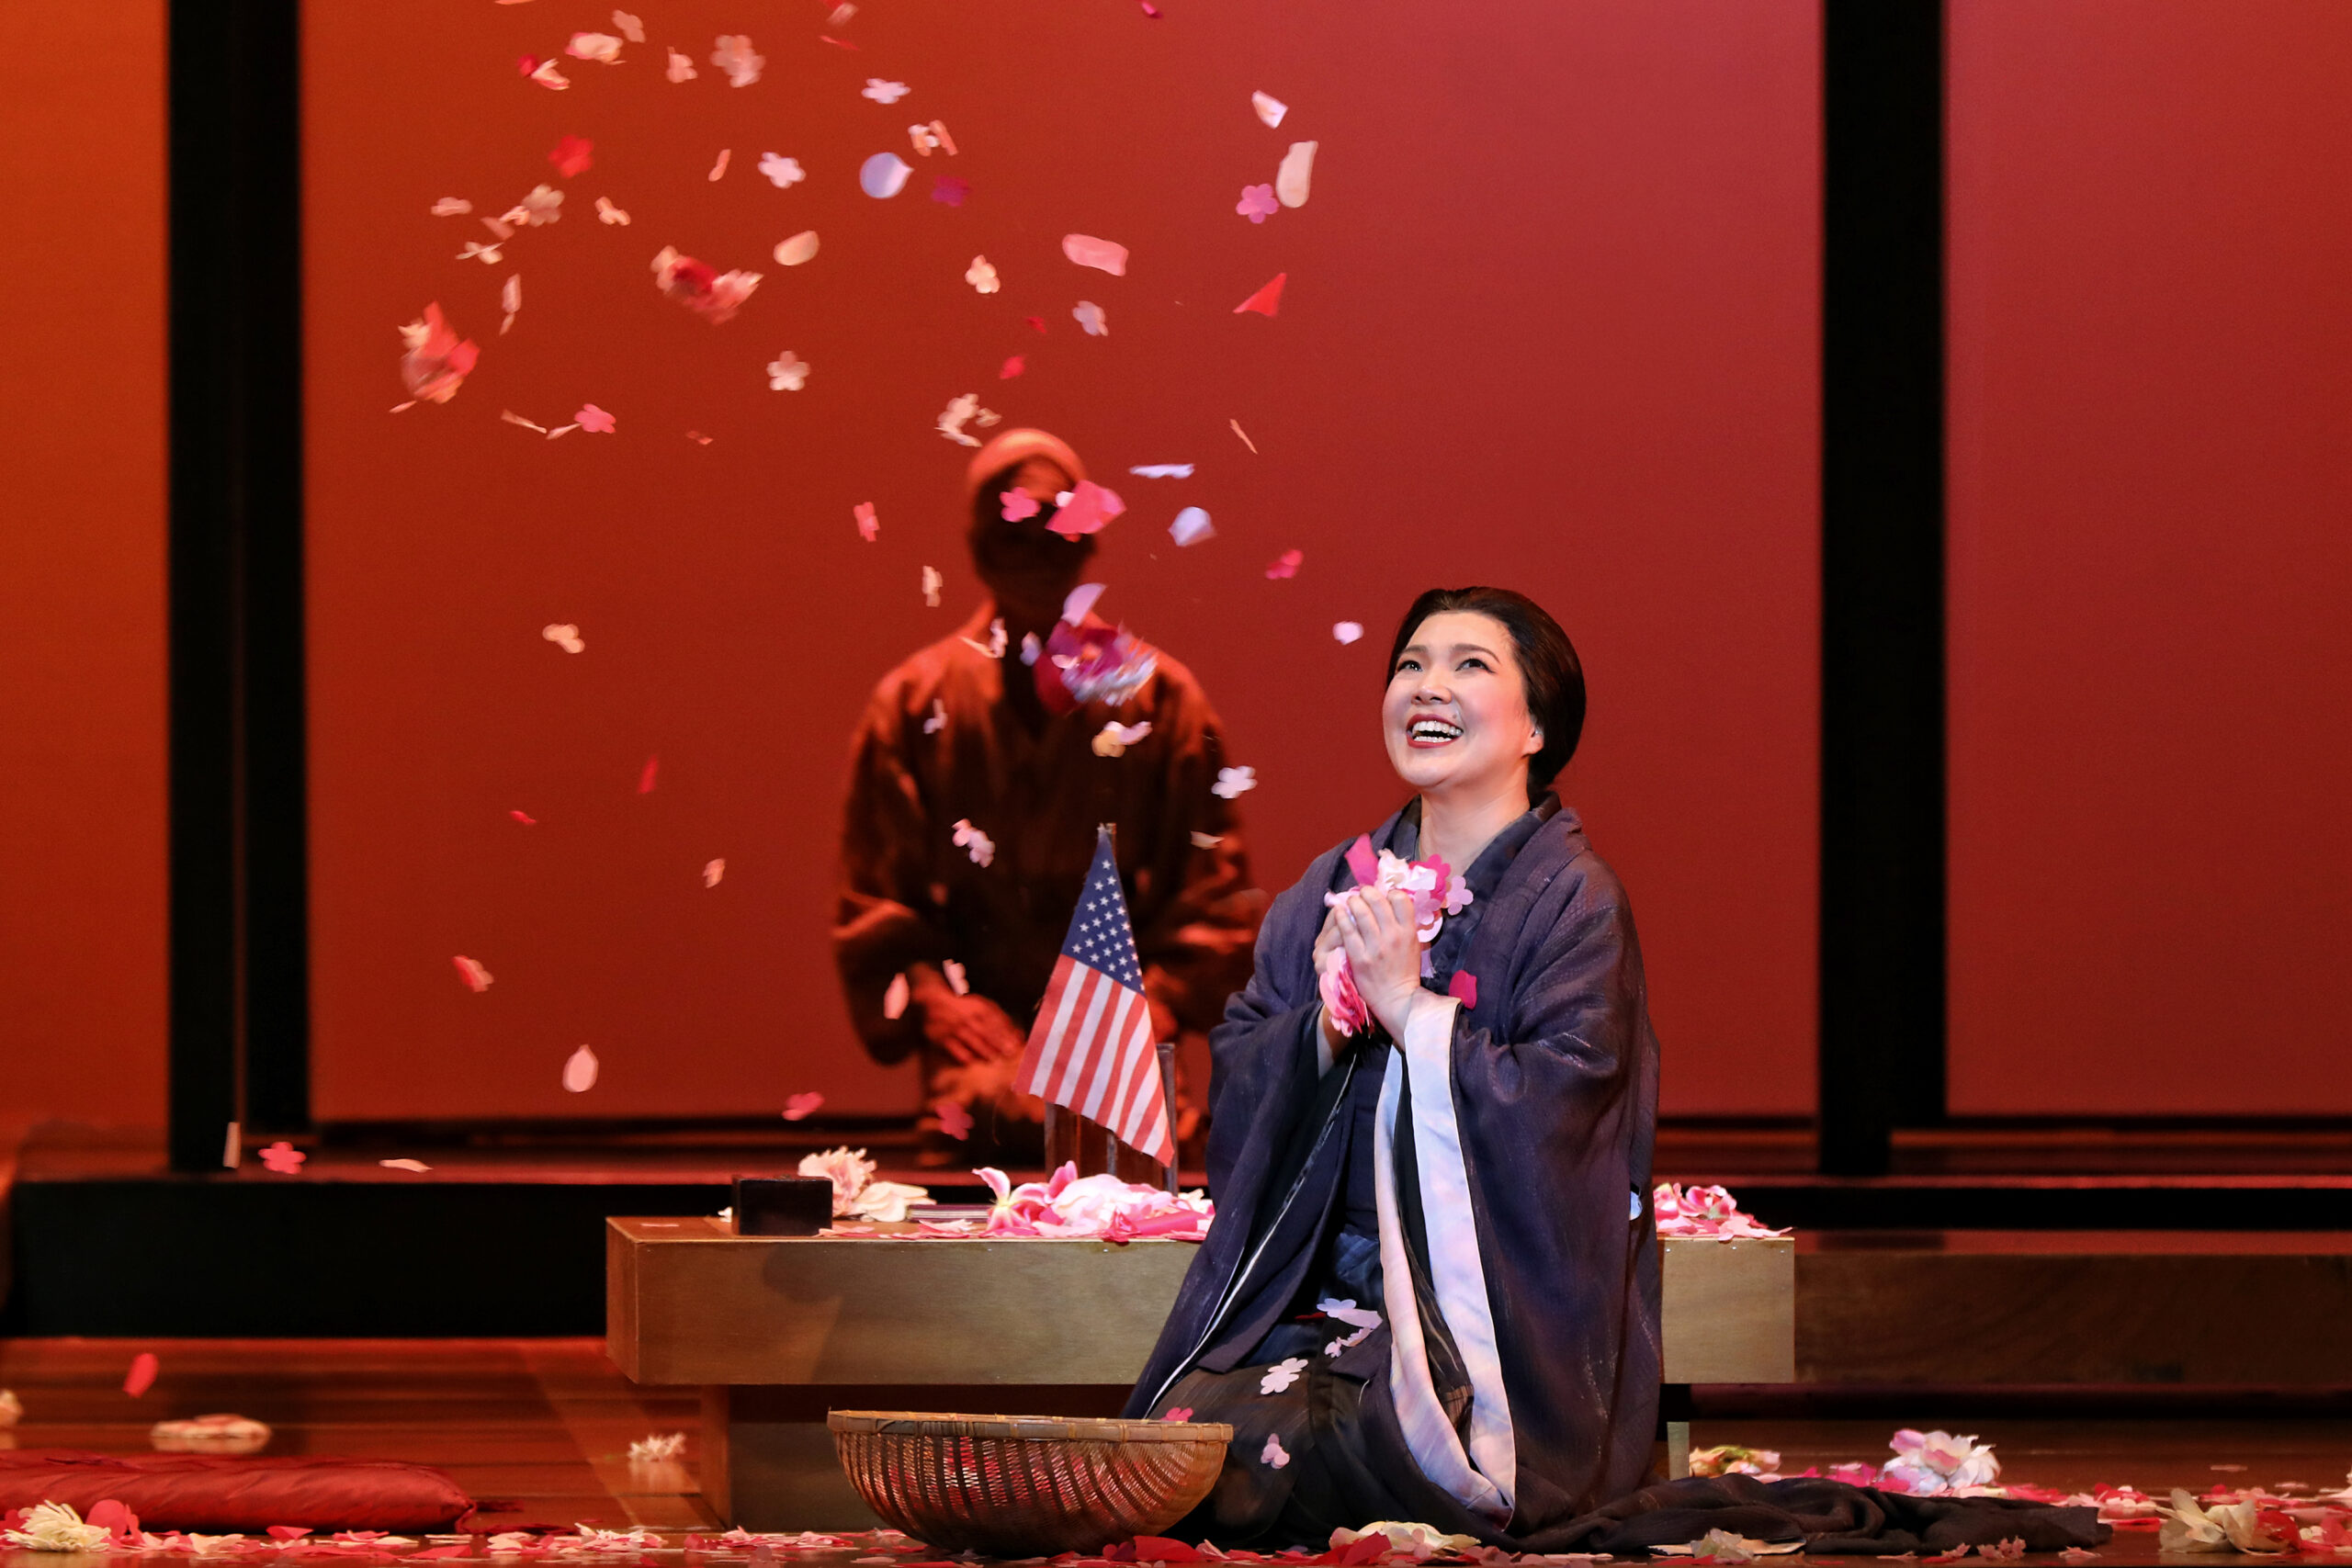 REVIEW: Madama Butterfly